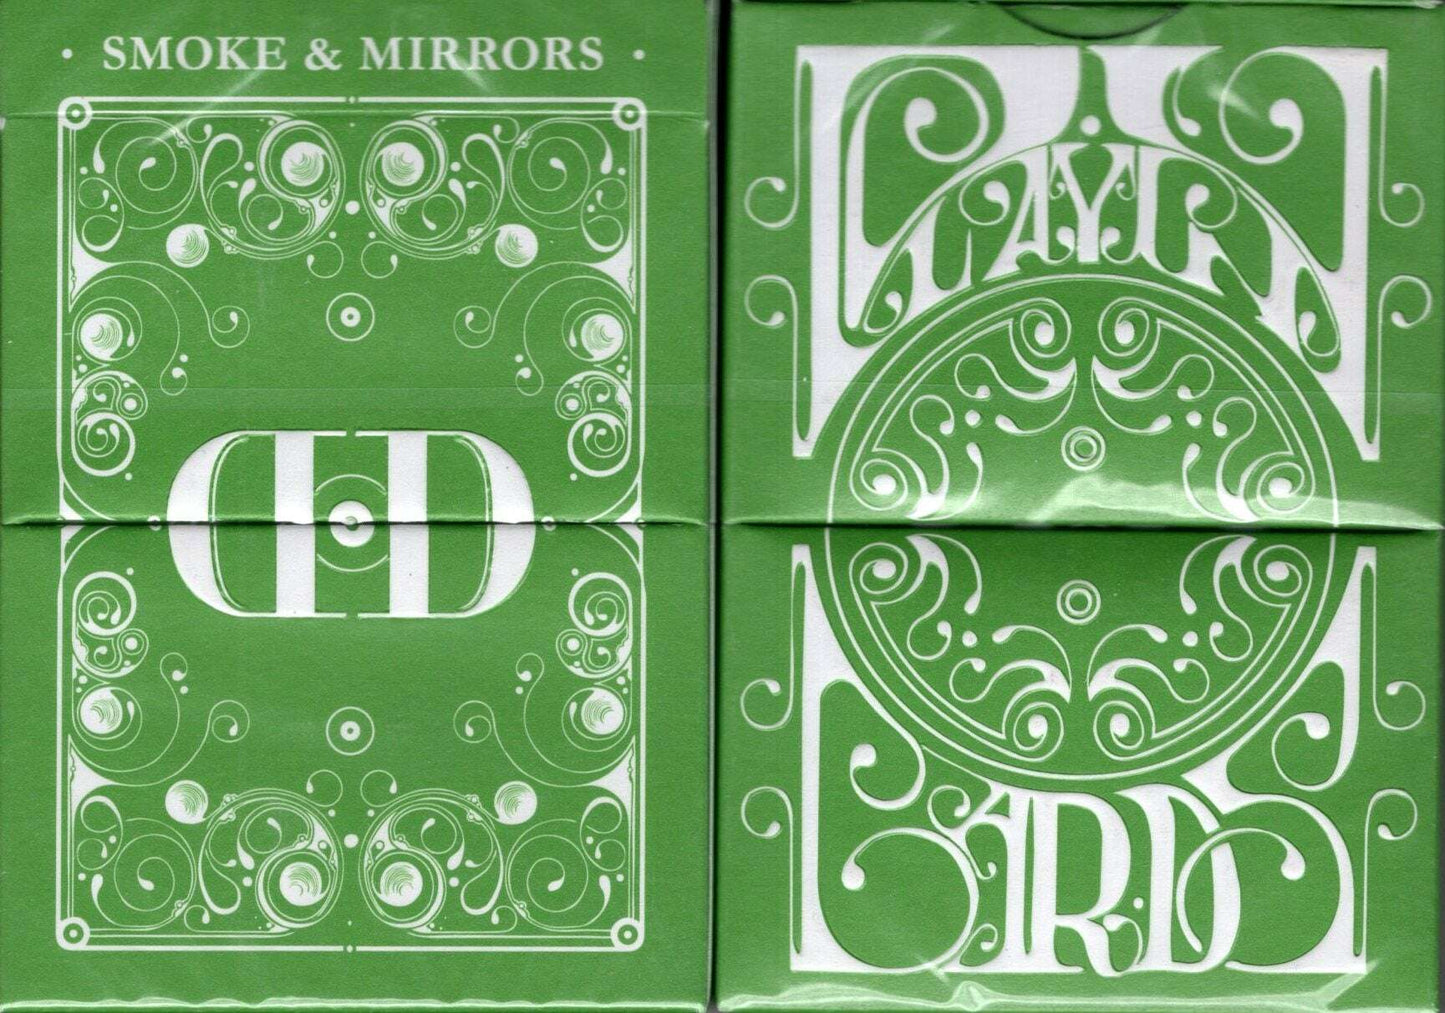 PlayingCardDecks.com-Smoke & Mirrors v8 Green Deluxe Playing Cards USPCC